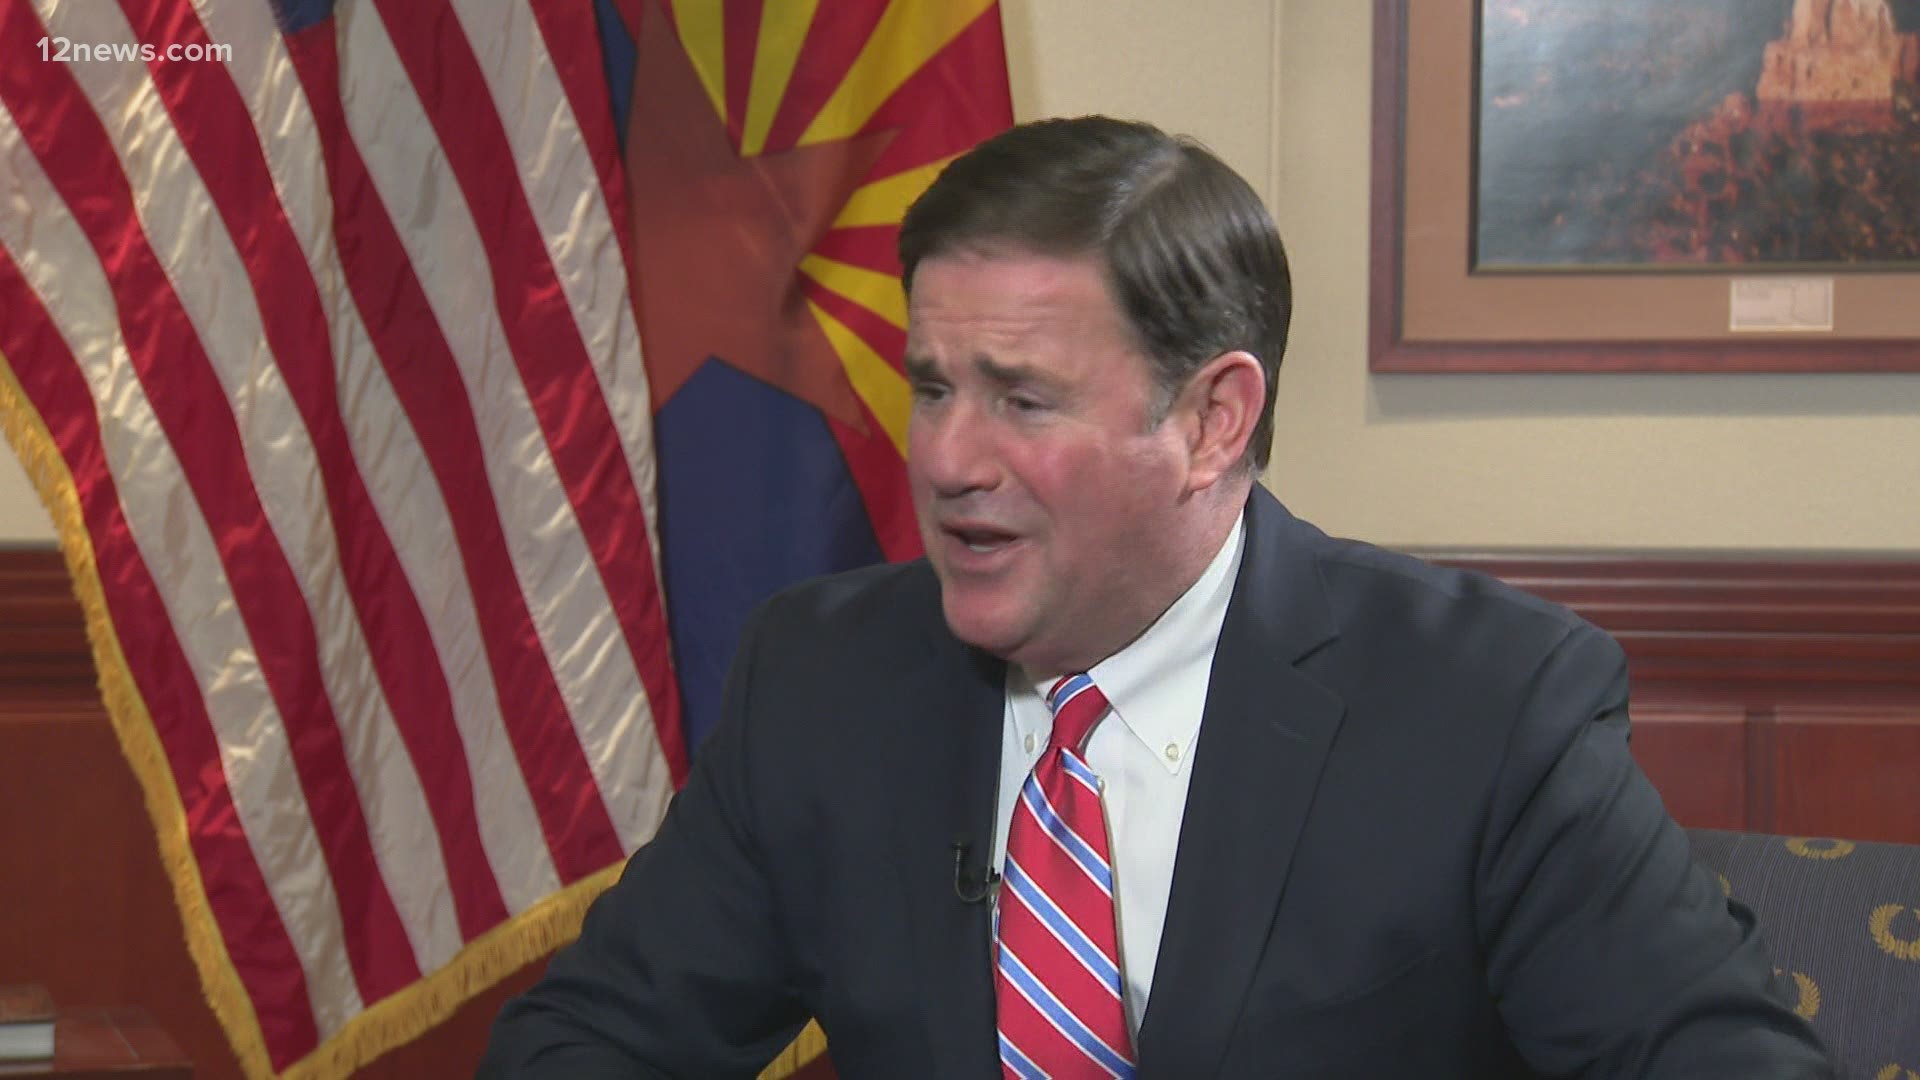 Gov. Ducey says that while Arizona may be on the last lap of the COVID-19 race, citizens need to stay vigilant.